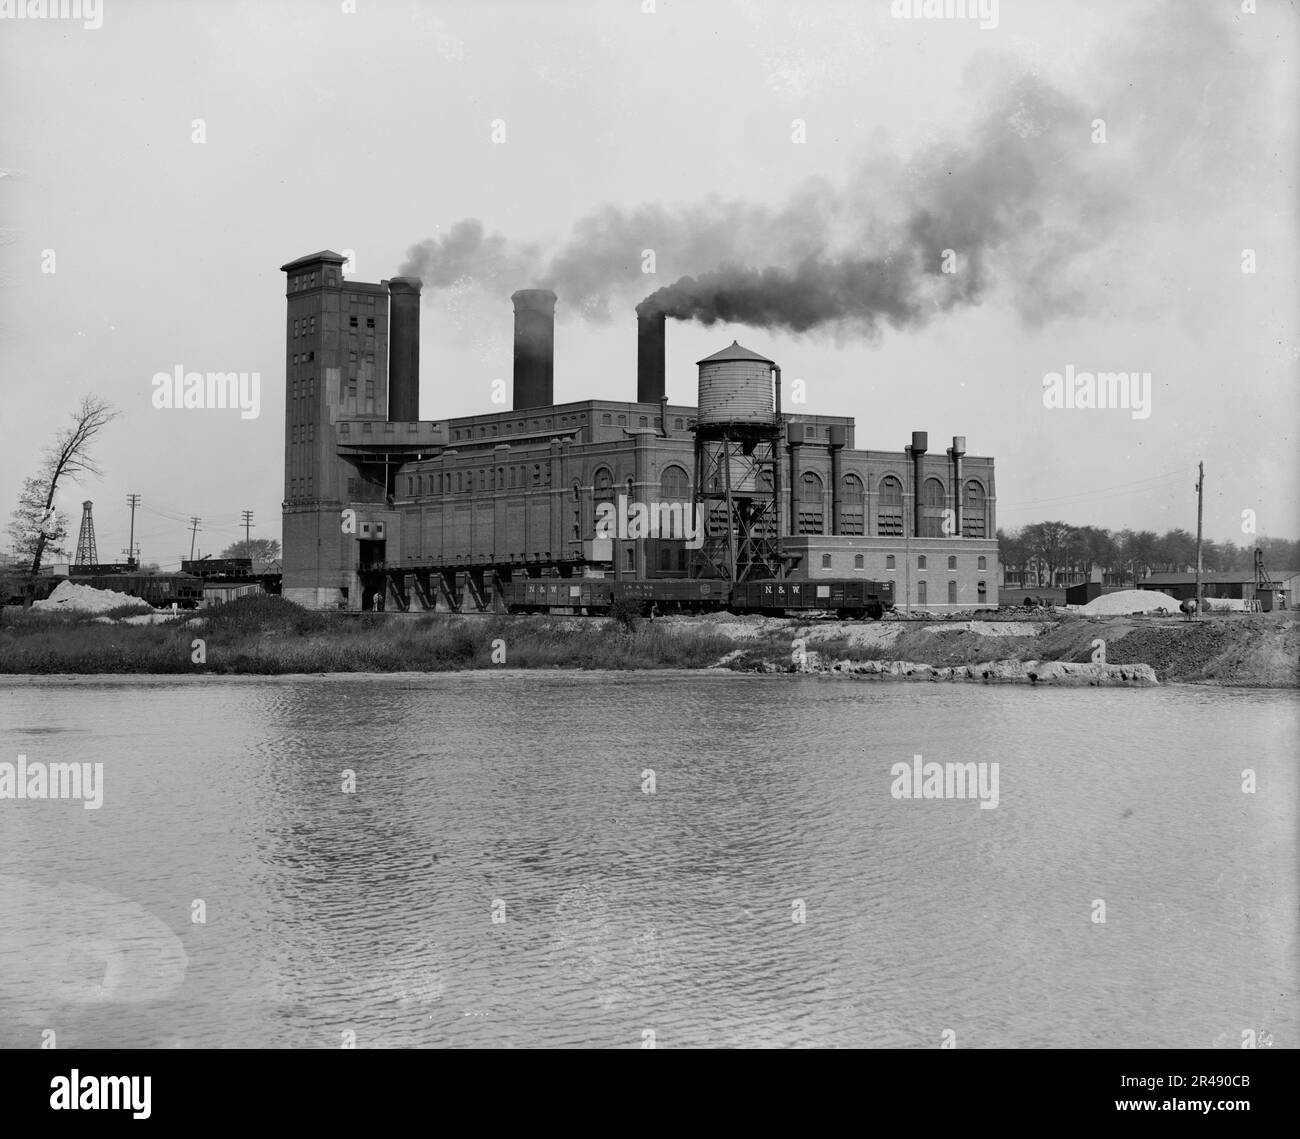 Edison Electric plant [Detroit Edison Company], Detroit, Mich., between 1900 and 1910. Stock Photo